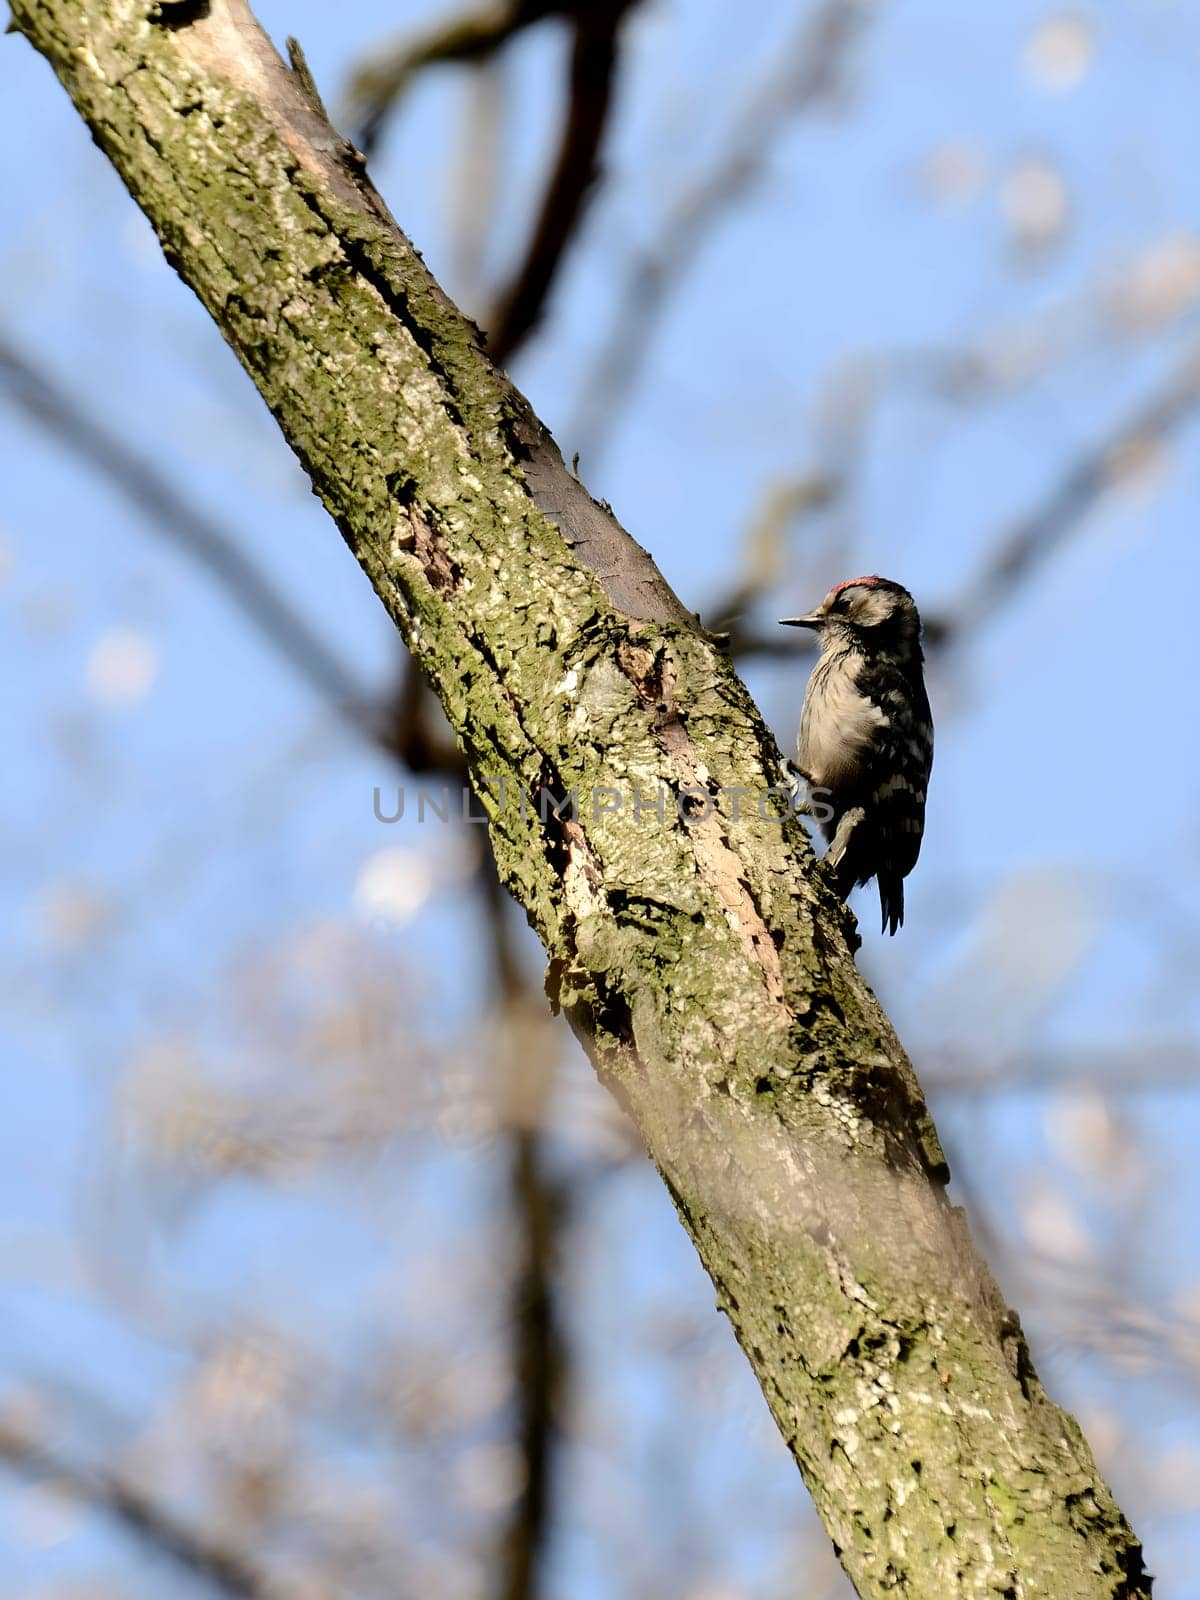 Lesser Spotted Woodpecker skillfully clinging to a tree trunk, set against a beautifully blurred sky background, showcasing nature's harmony.